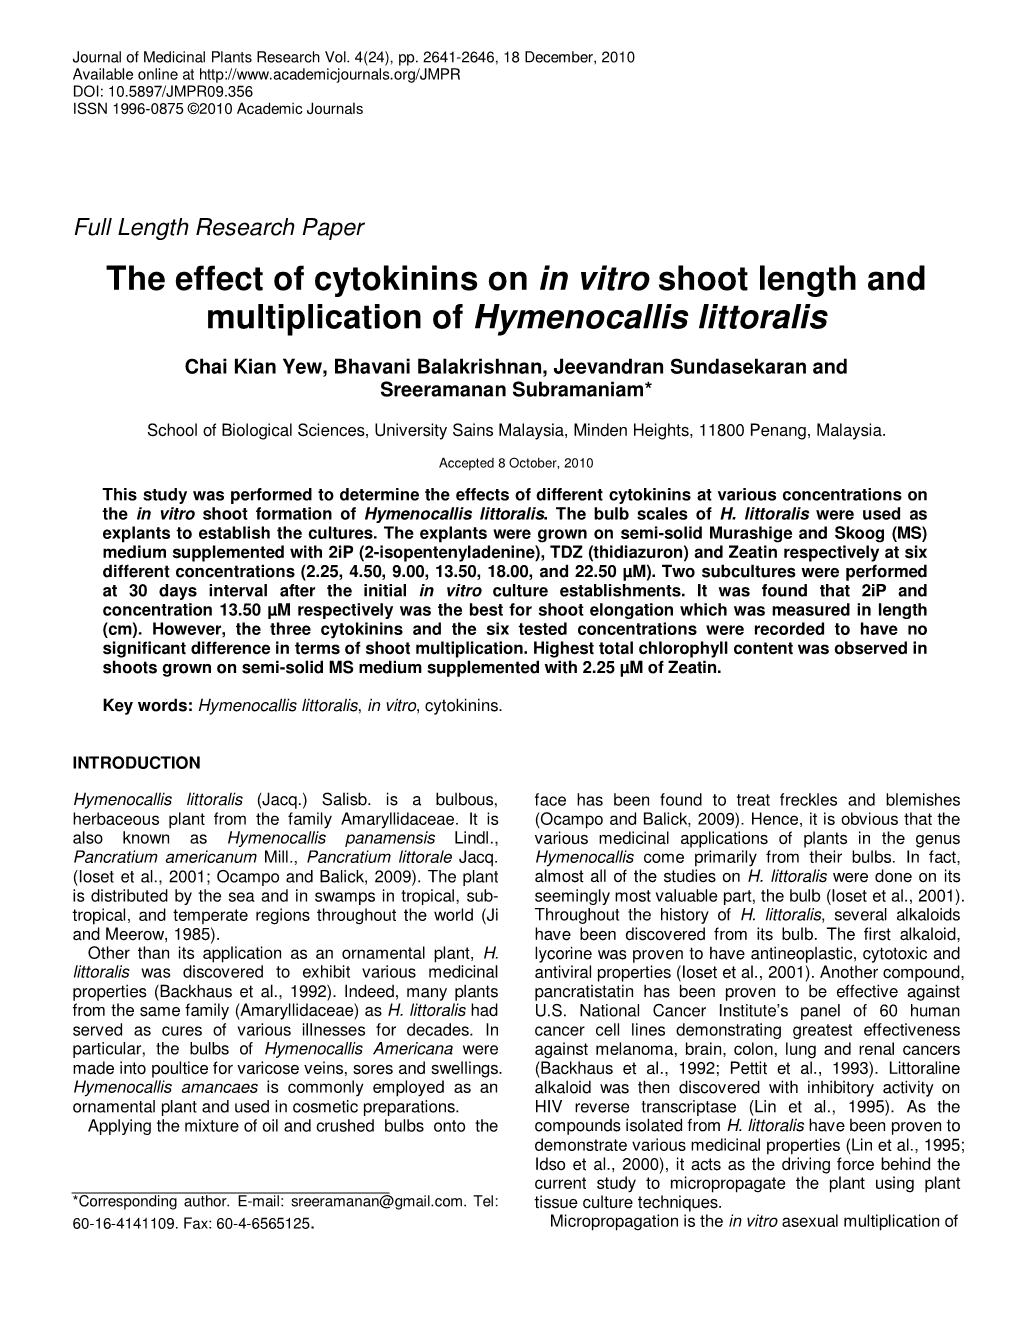 The Effect of Cytokinins on in Vitro Shoot Length and Multiplication of Hymenocallis Littoralis